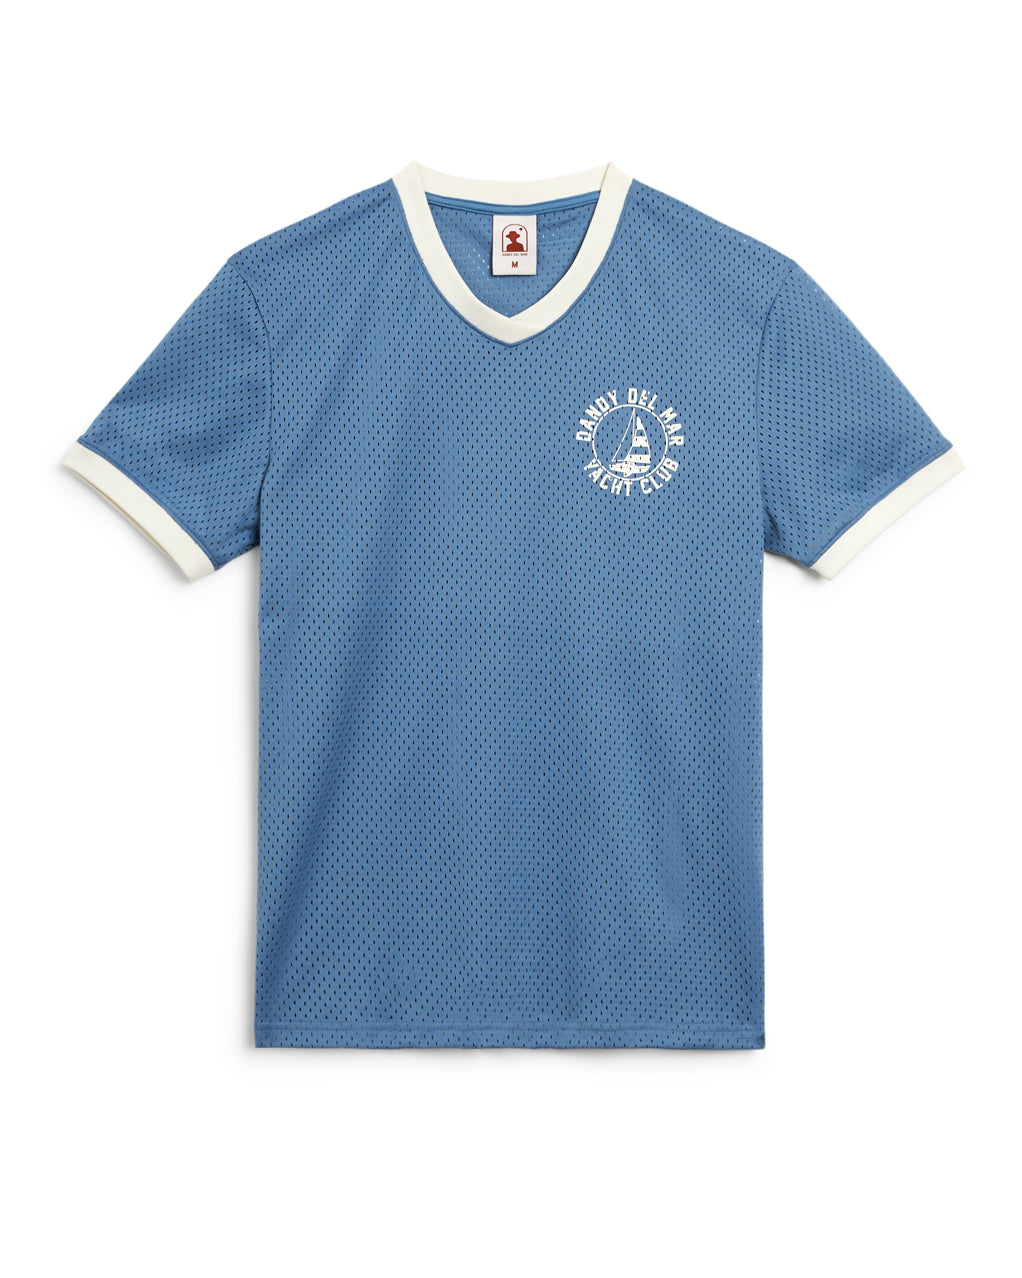 A blue Kaena Mesh Tee - Annapolis with white lettering from Dandy Del Mar.